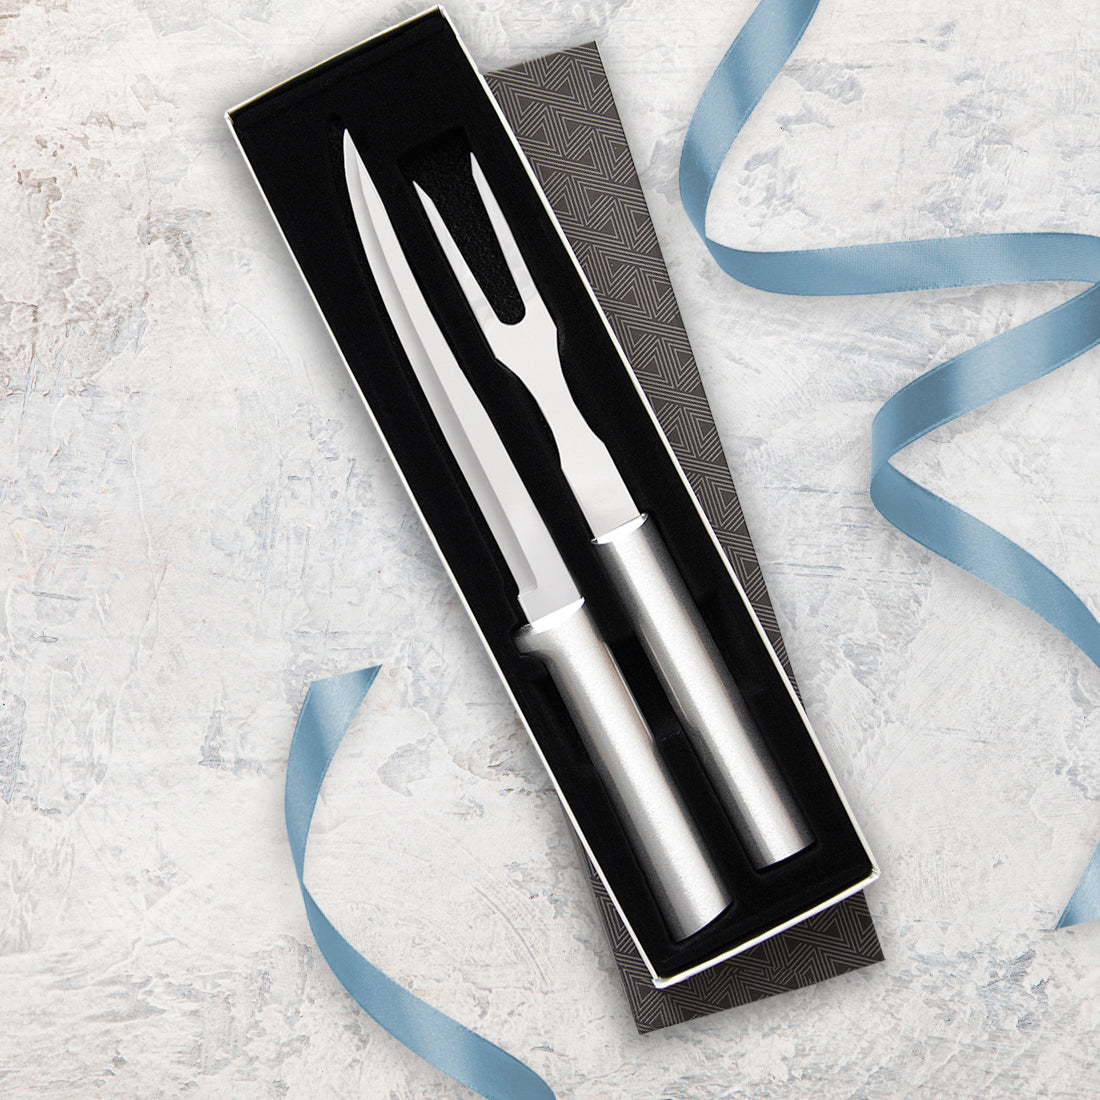 Rada Cutlery Carving Fork Stainless Steel Tine and Aluminum Handle